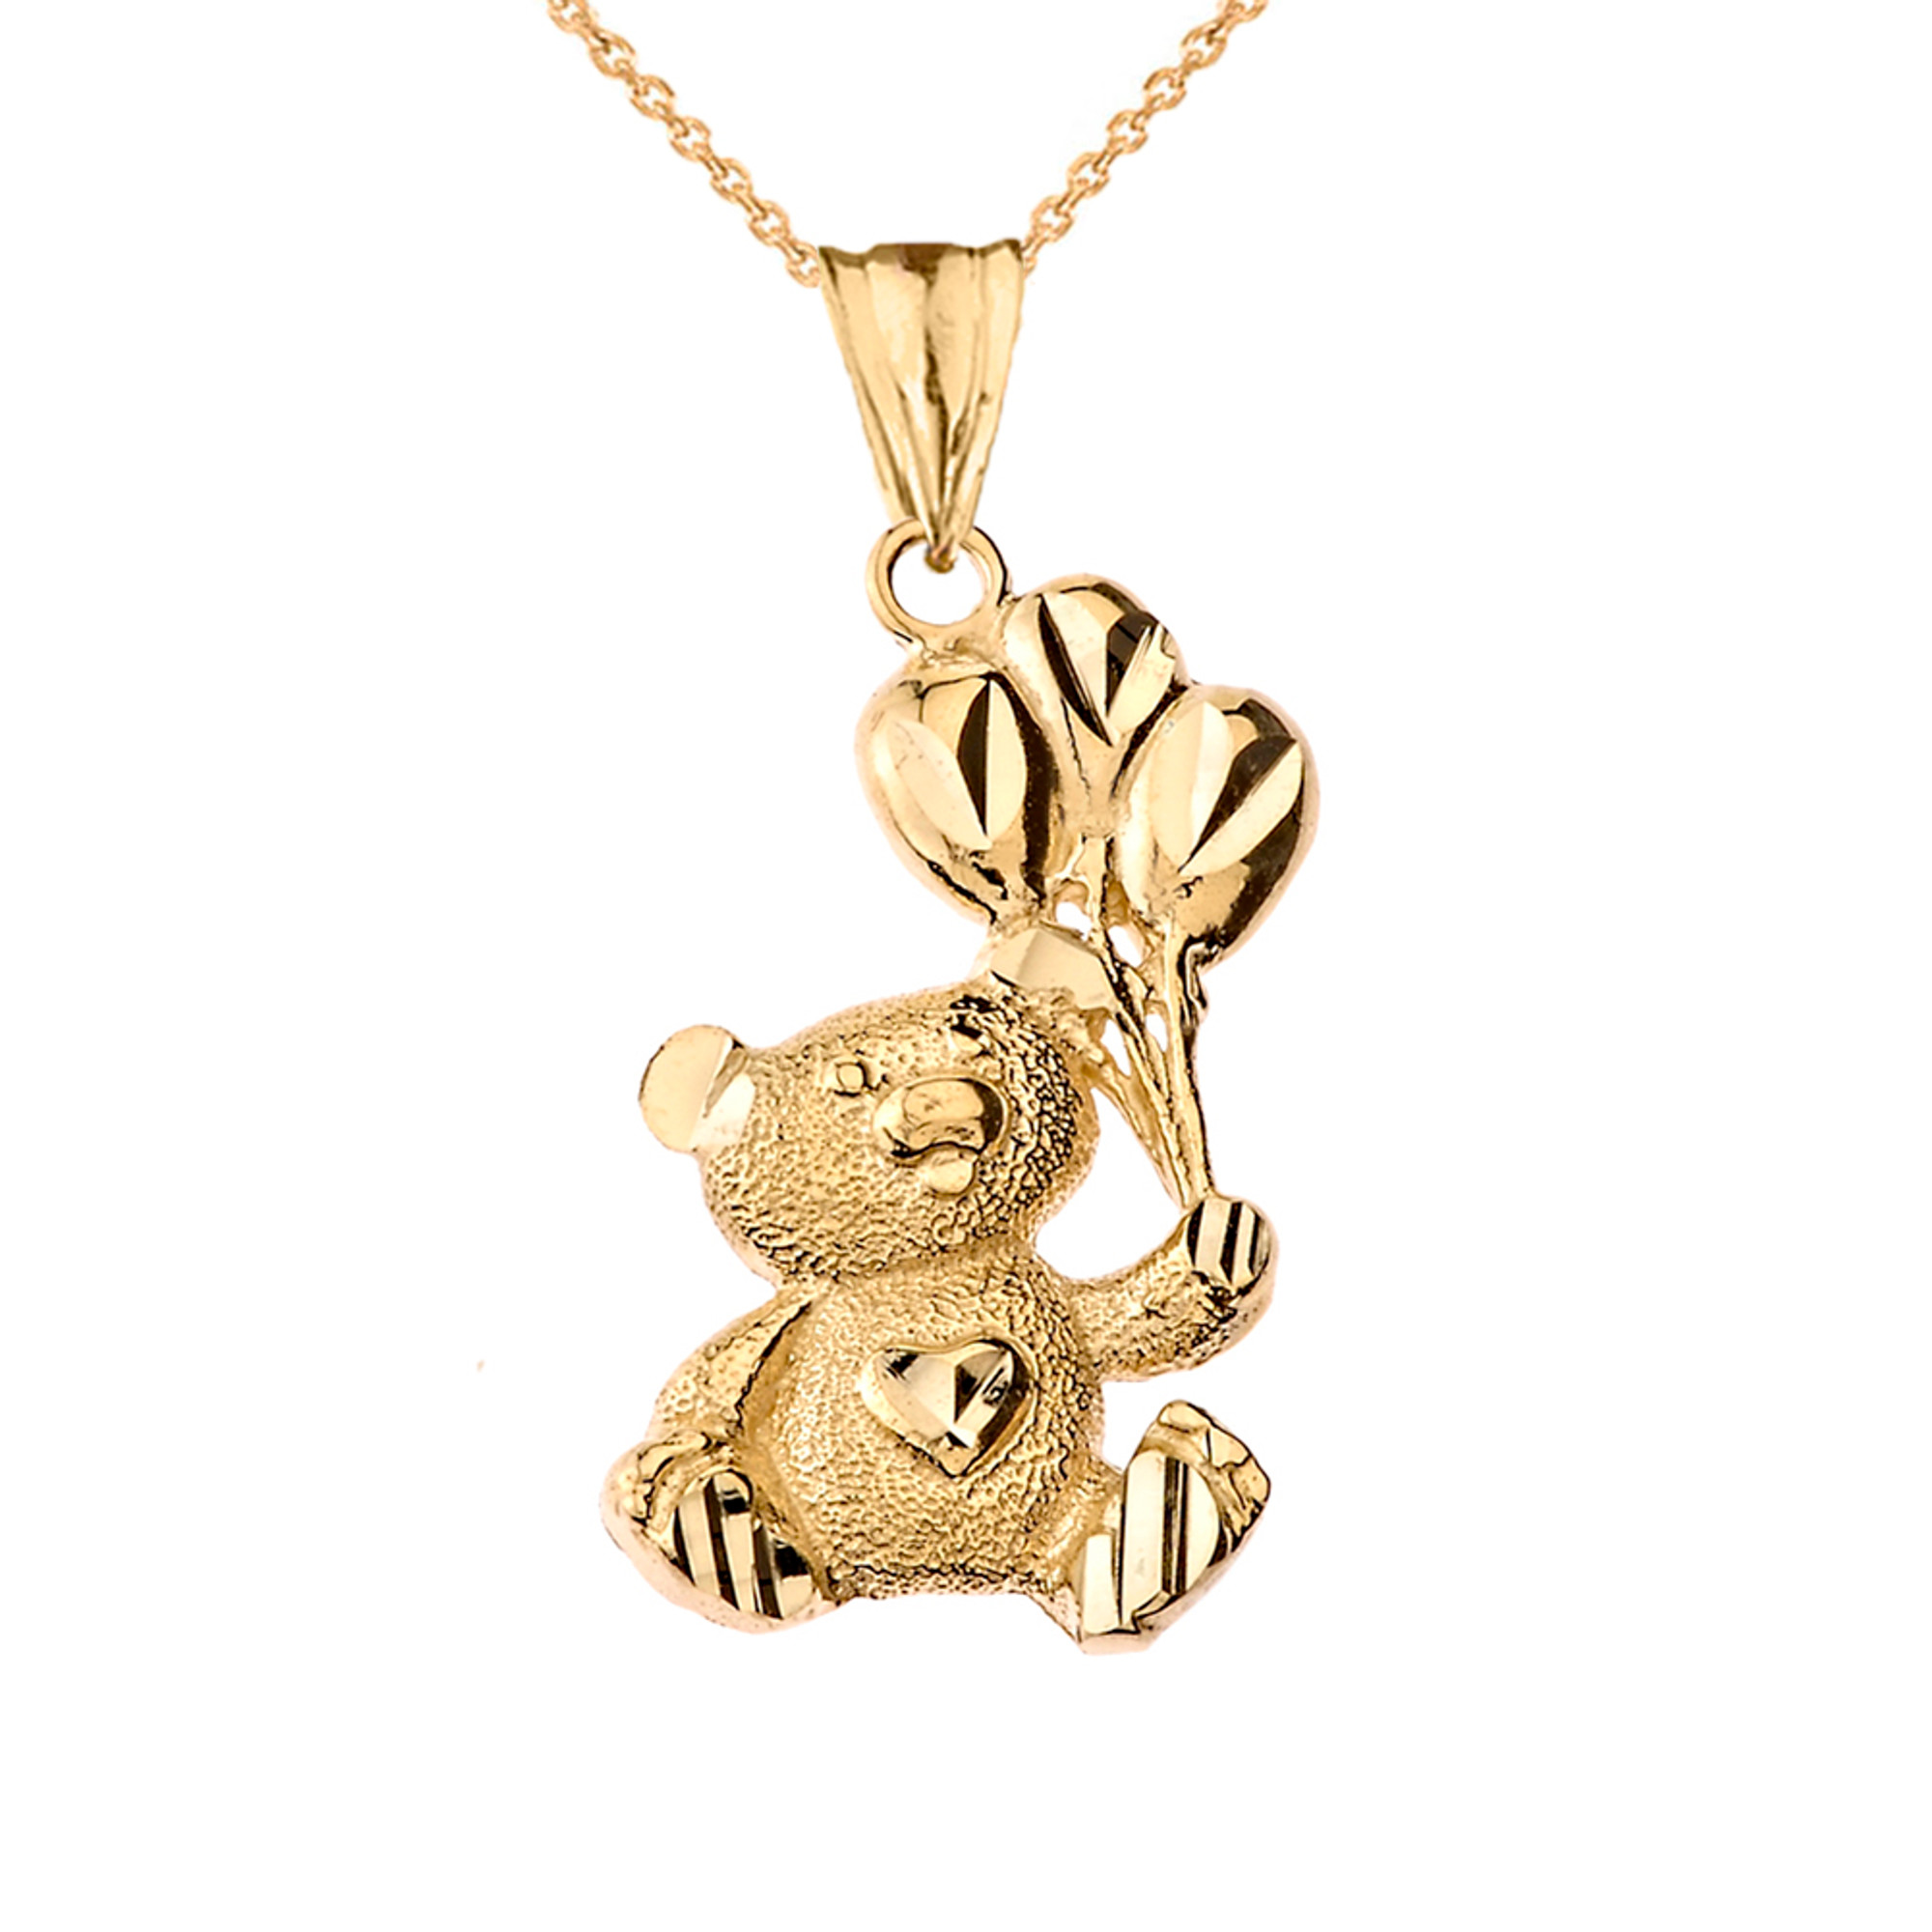 ASOS DESIGN necklace with pearl and teddy bear charm in gold tone | ASOS